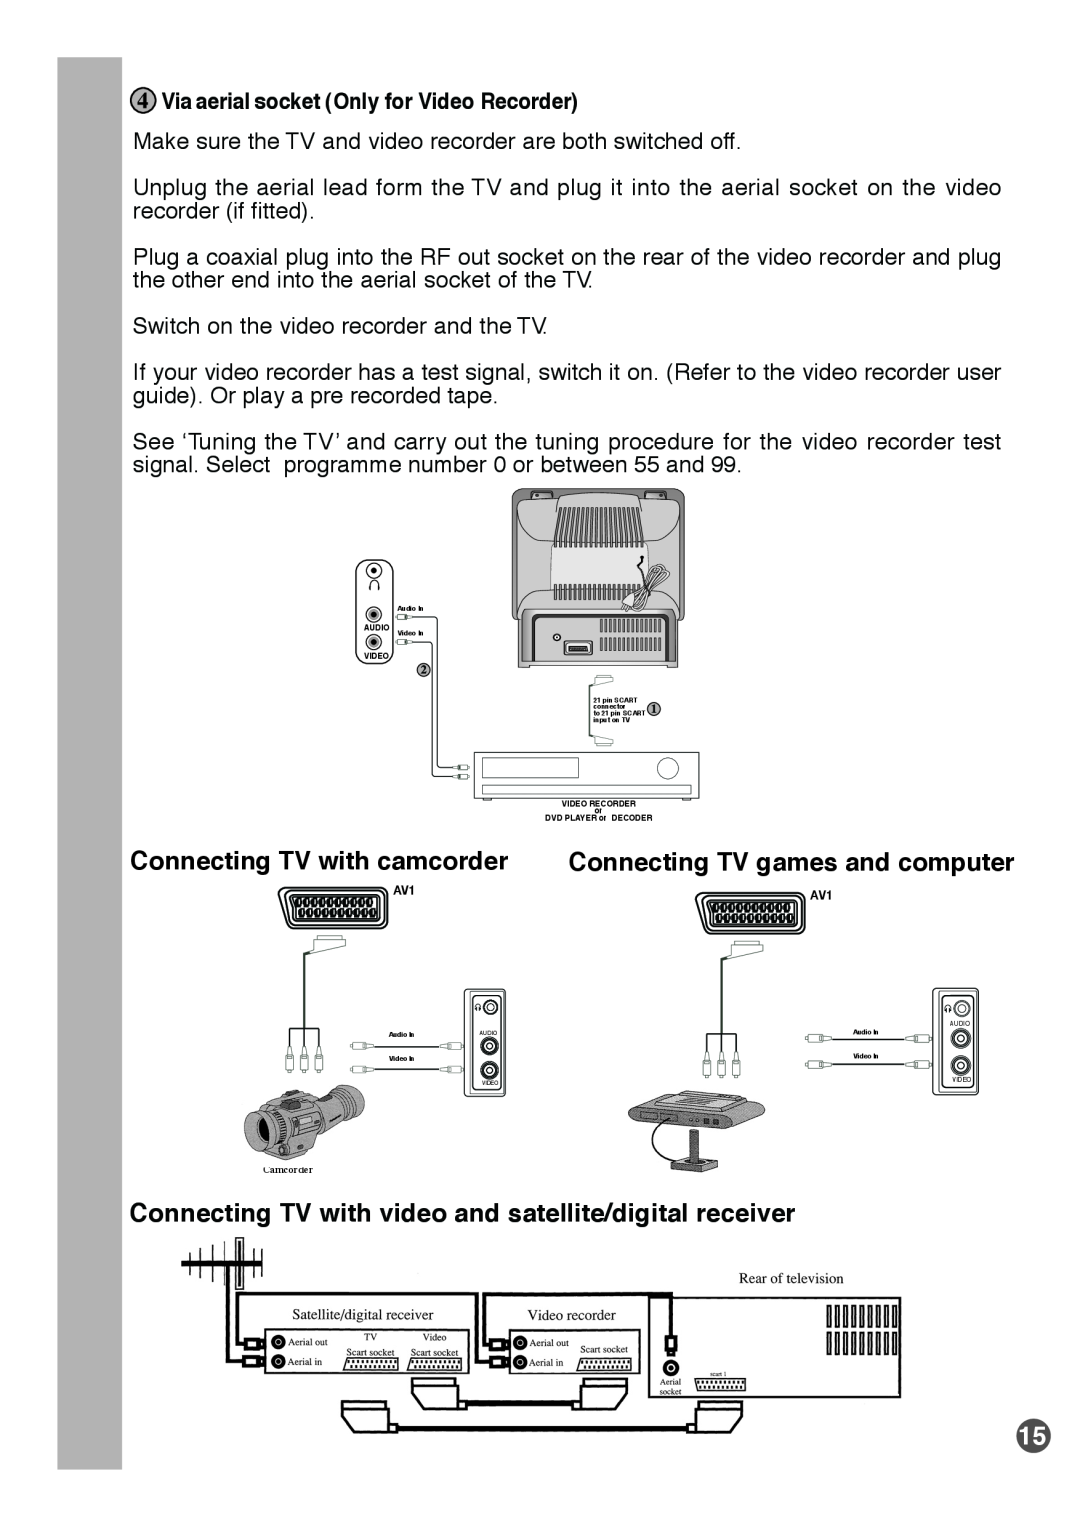 Beko E1 manual Connecting TV with camcorder, Connecting TV games and computer, Via aerial socket Only for Video Recorder 